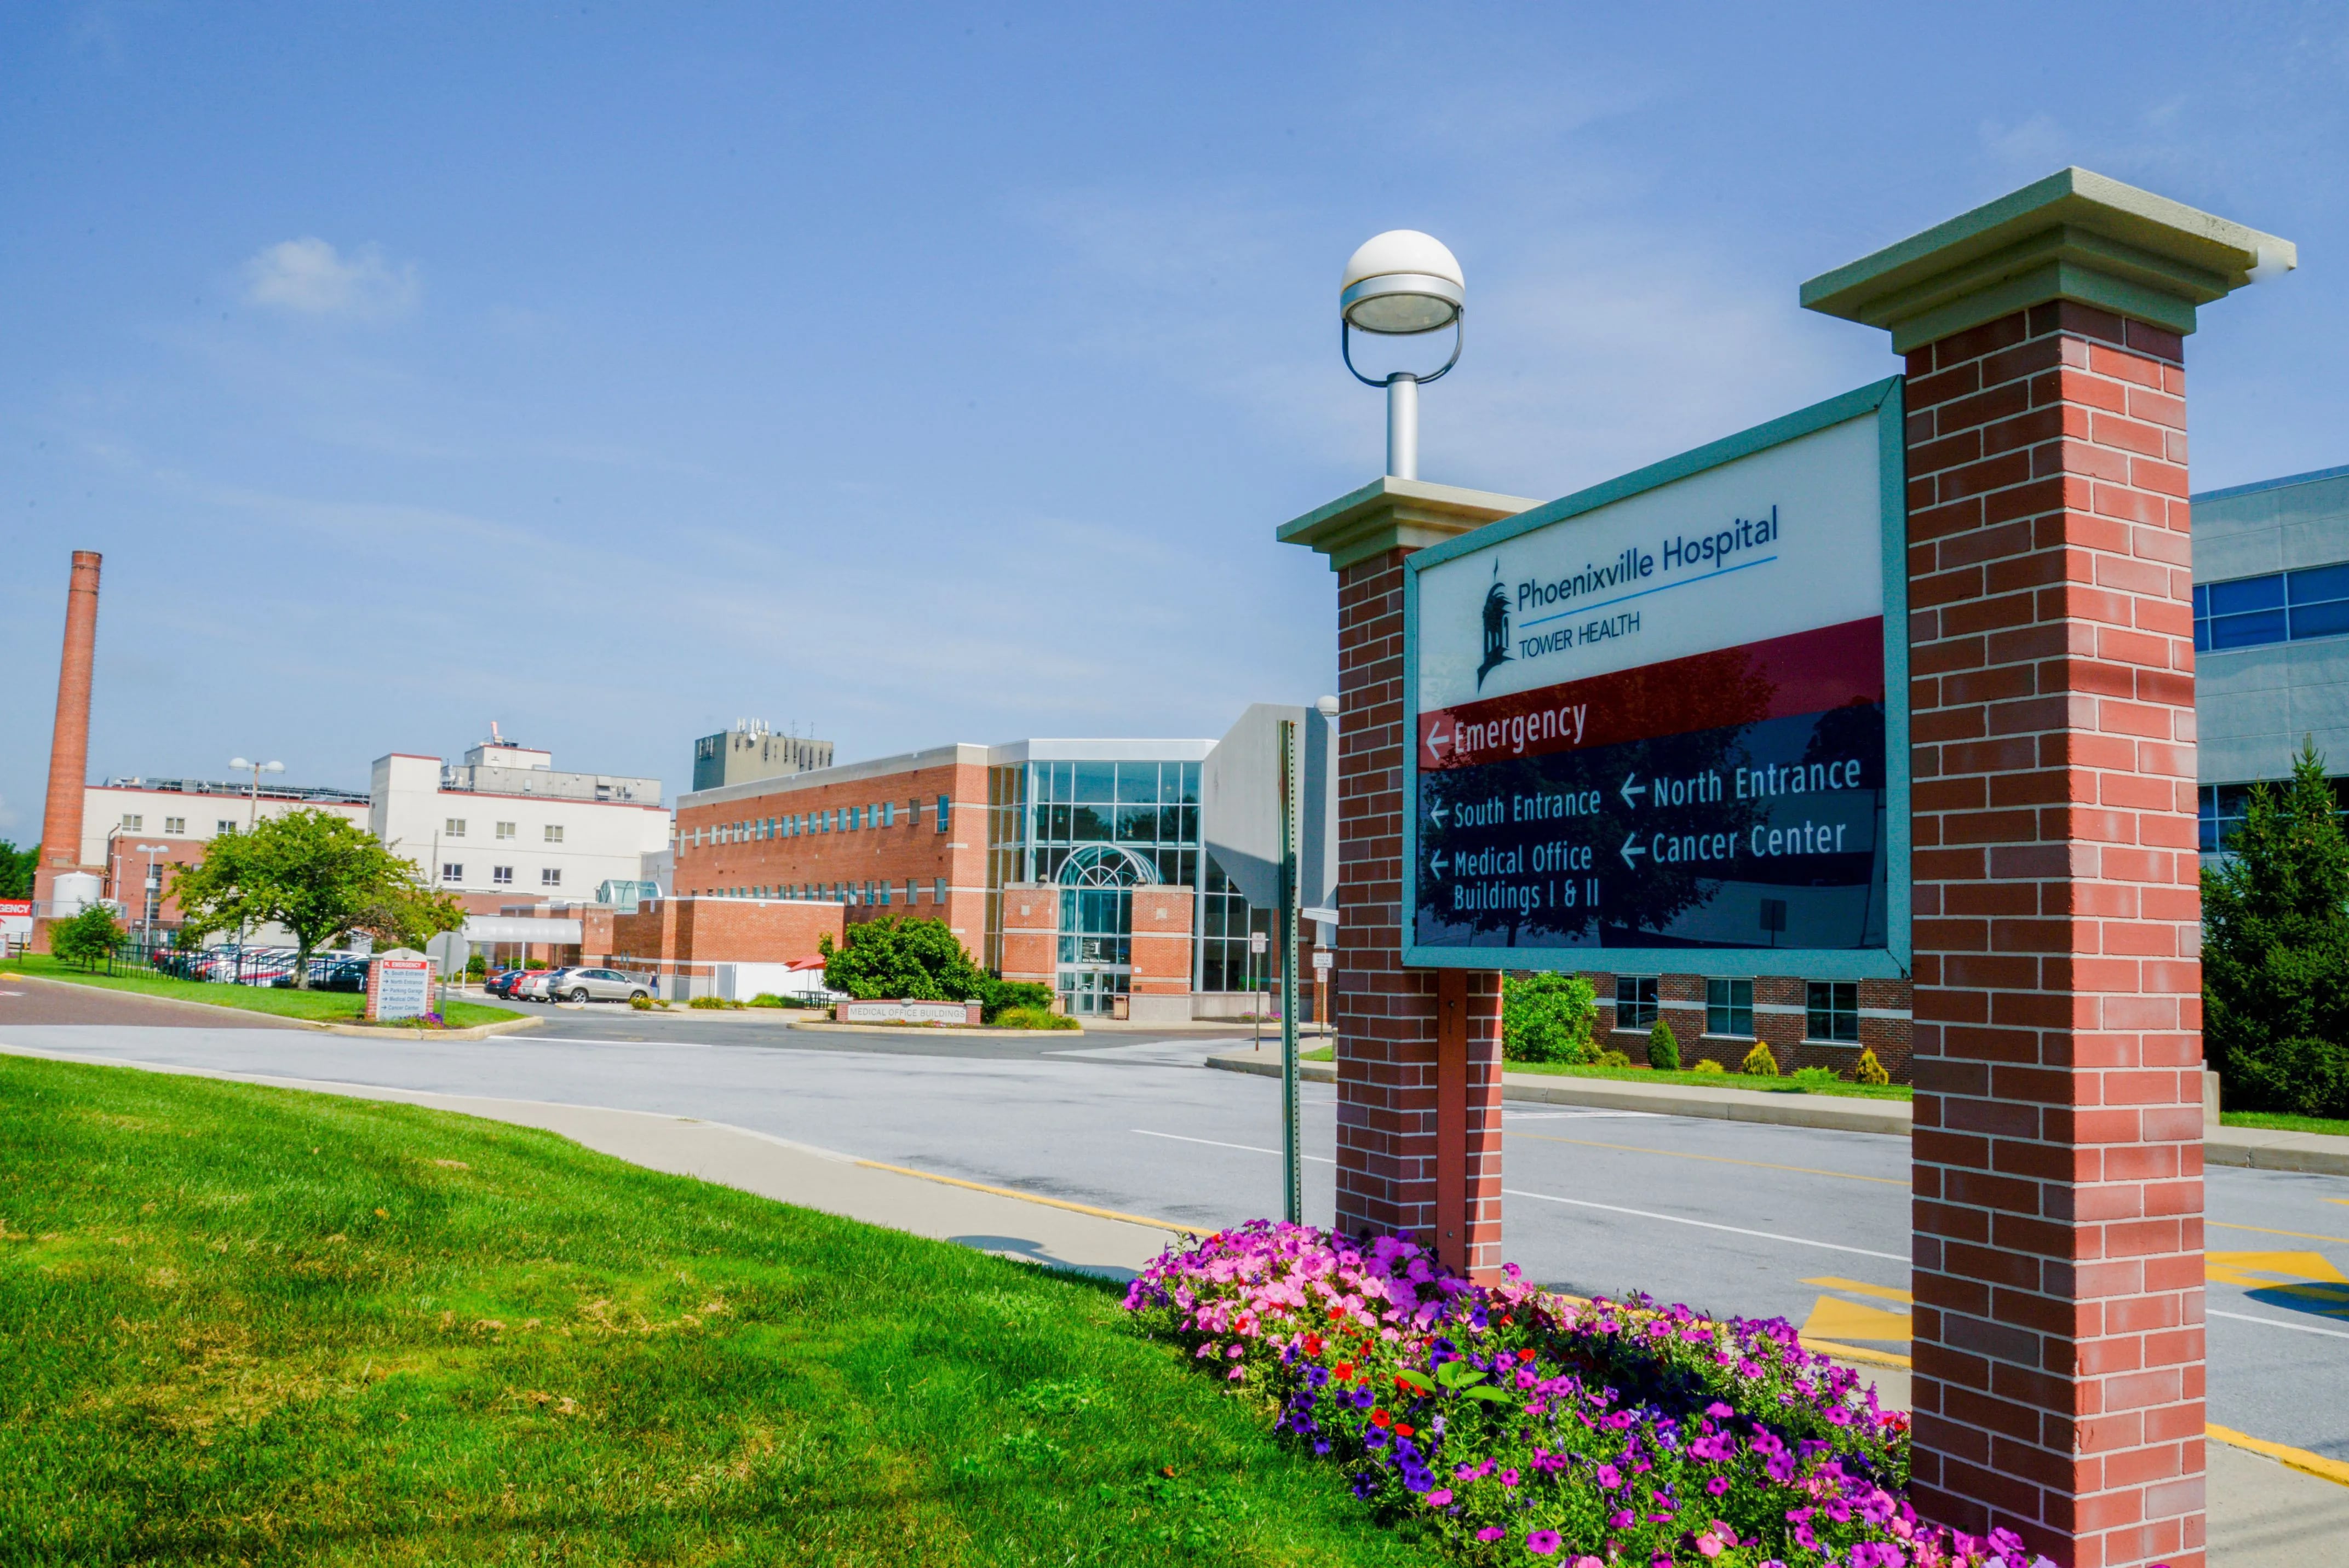 Tower Health officials said Phoenixville Hospital this year dramatically increased the amount of charity it provides.